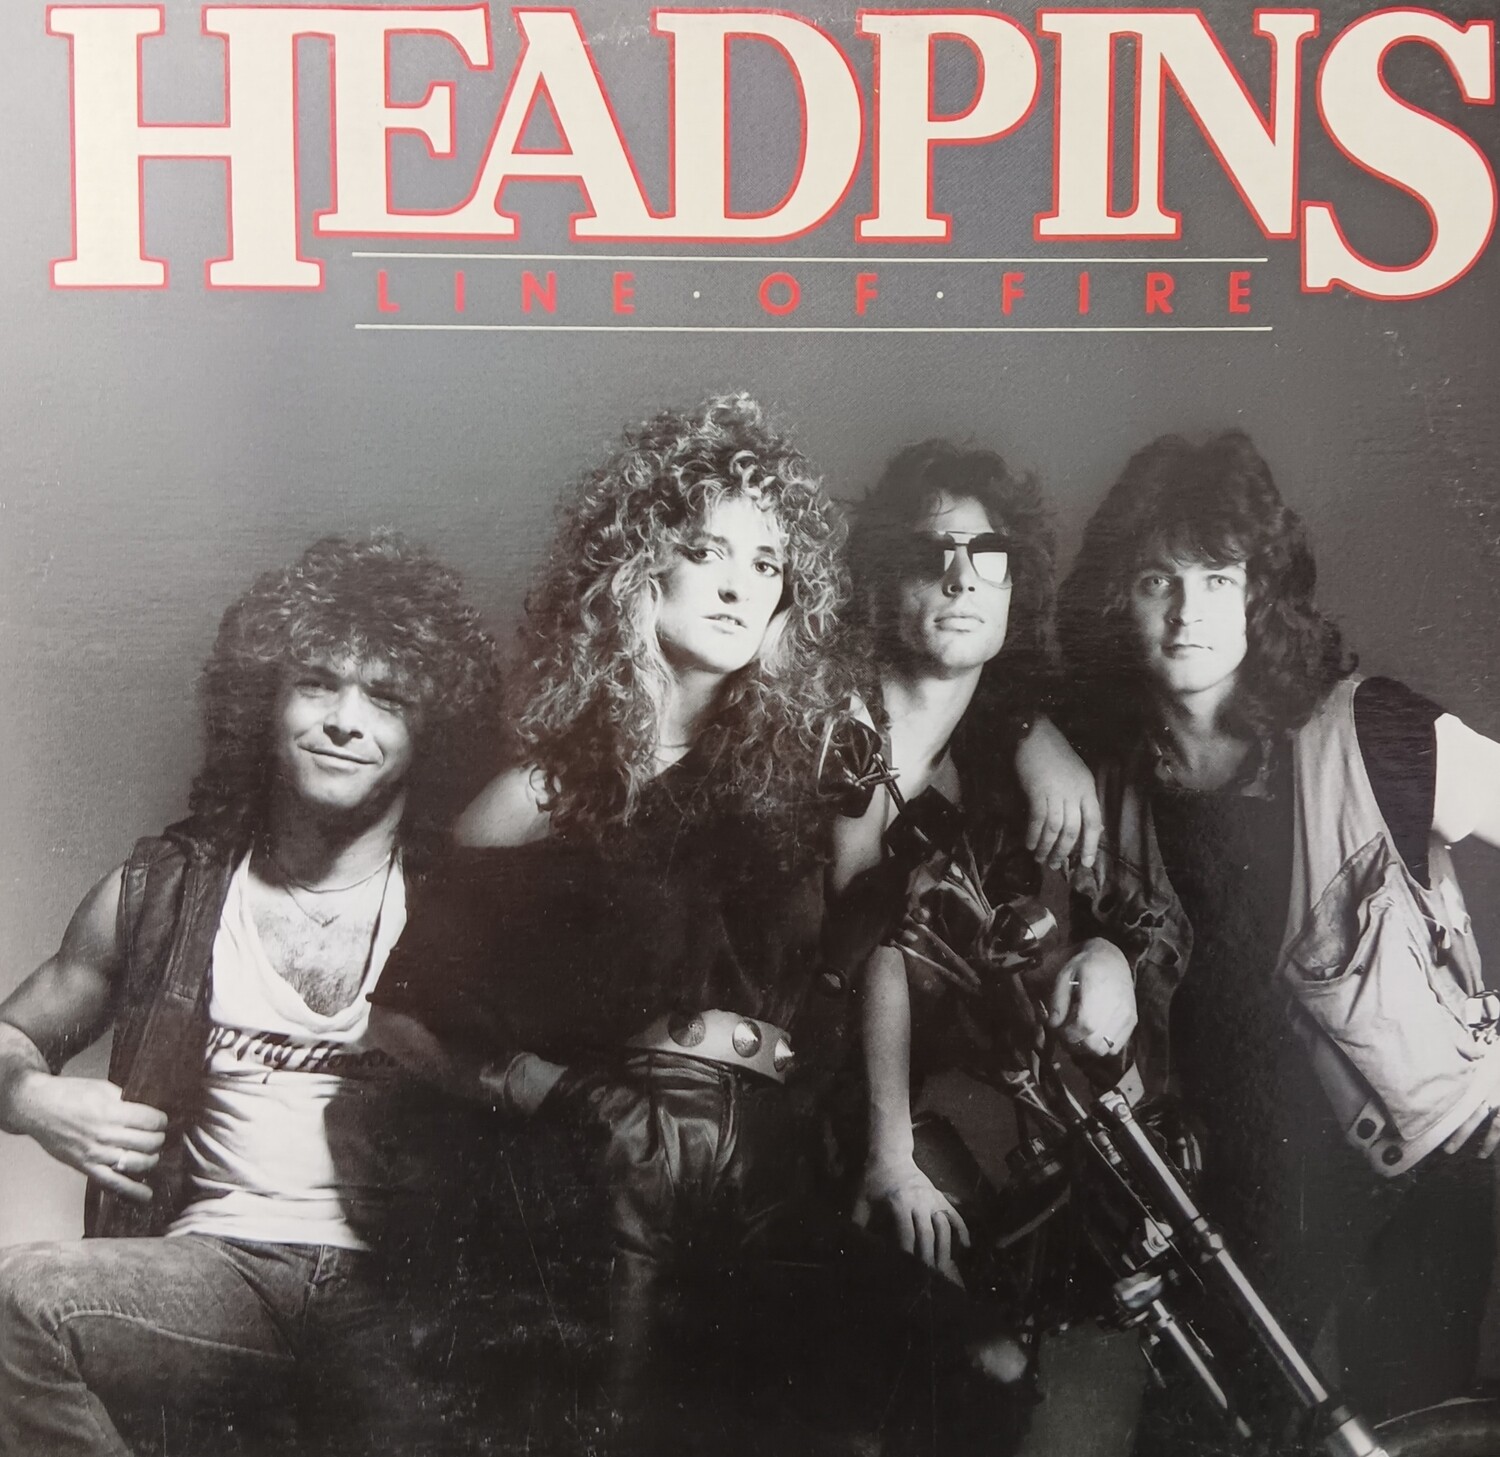 HEADPINS - Line of fire